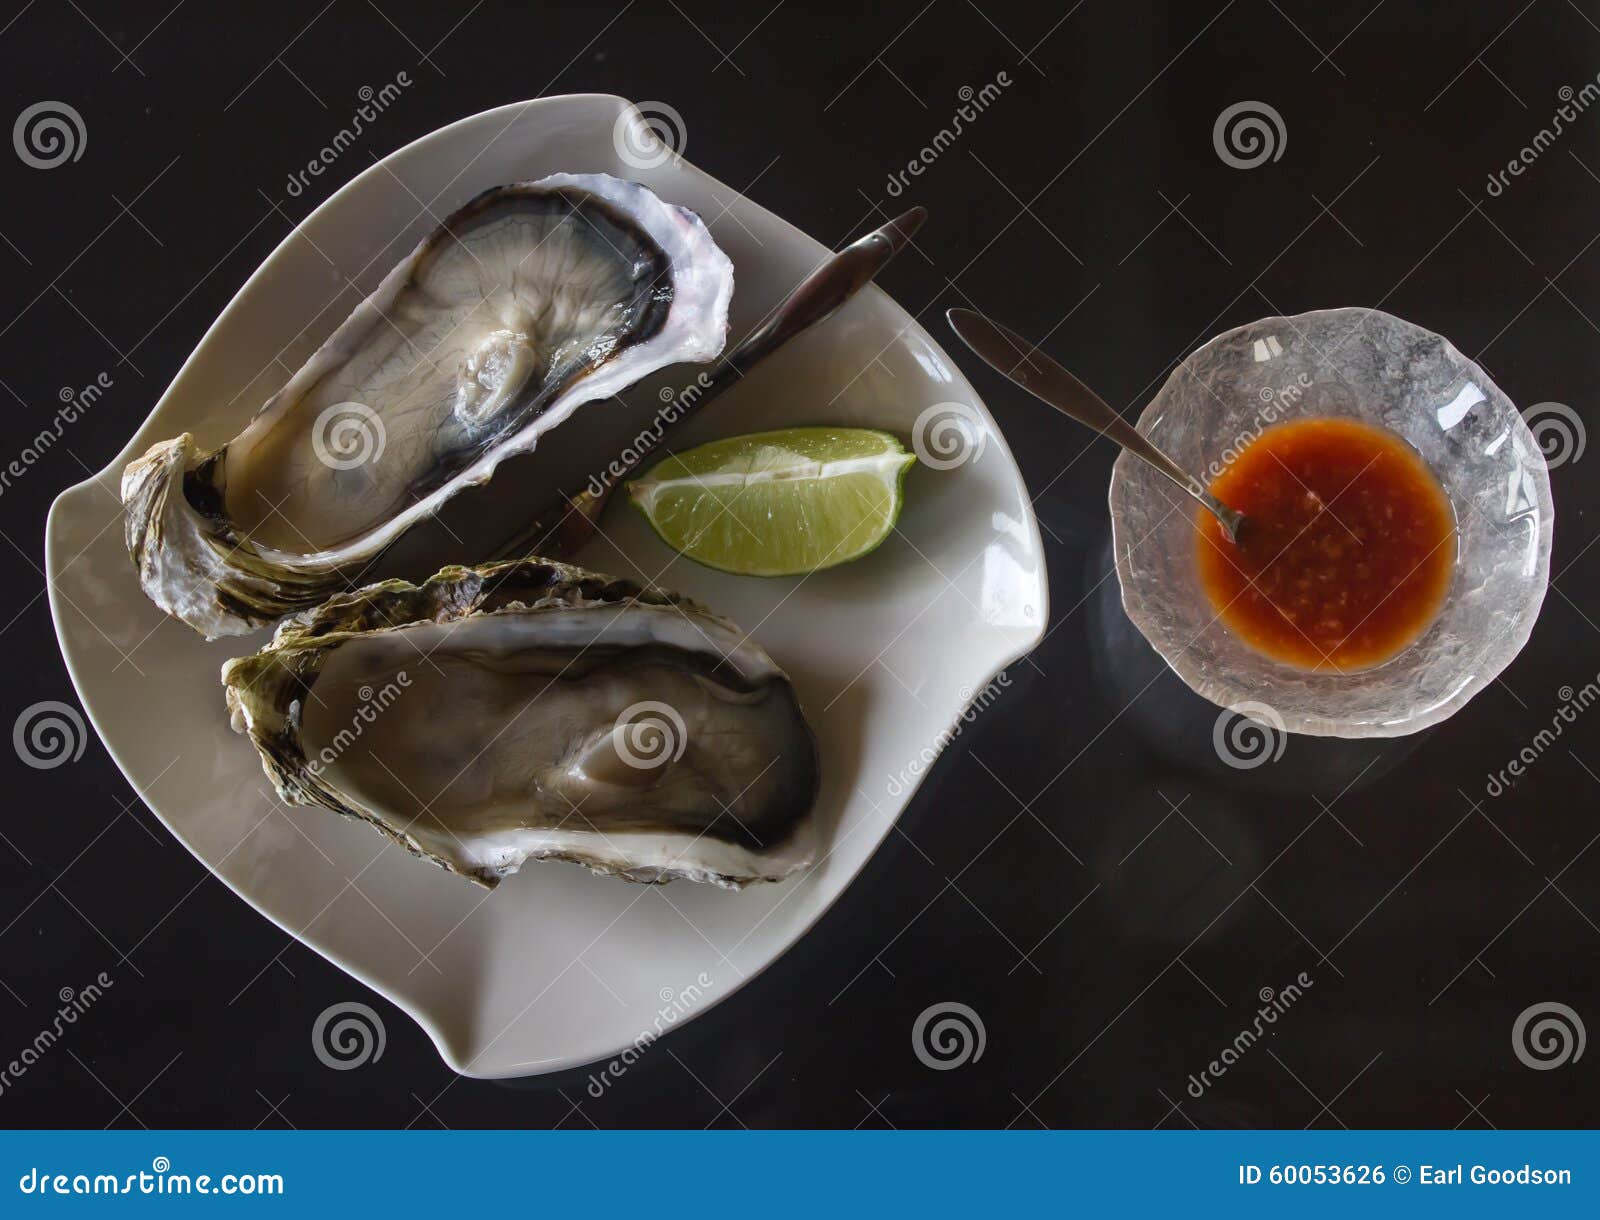 oysters and condiments for lunch